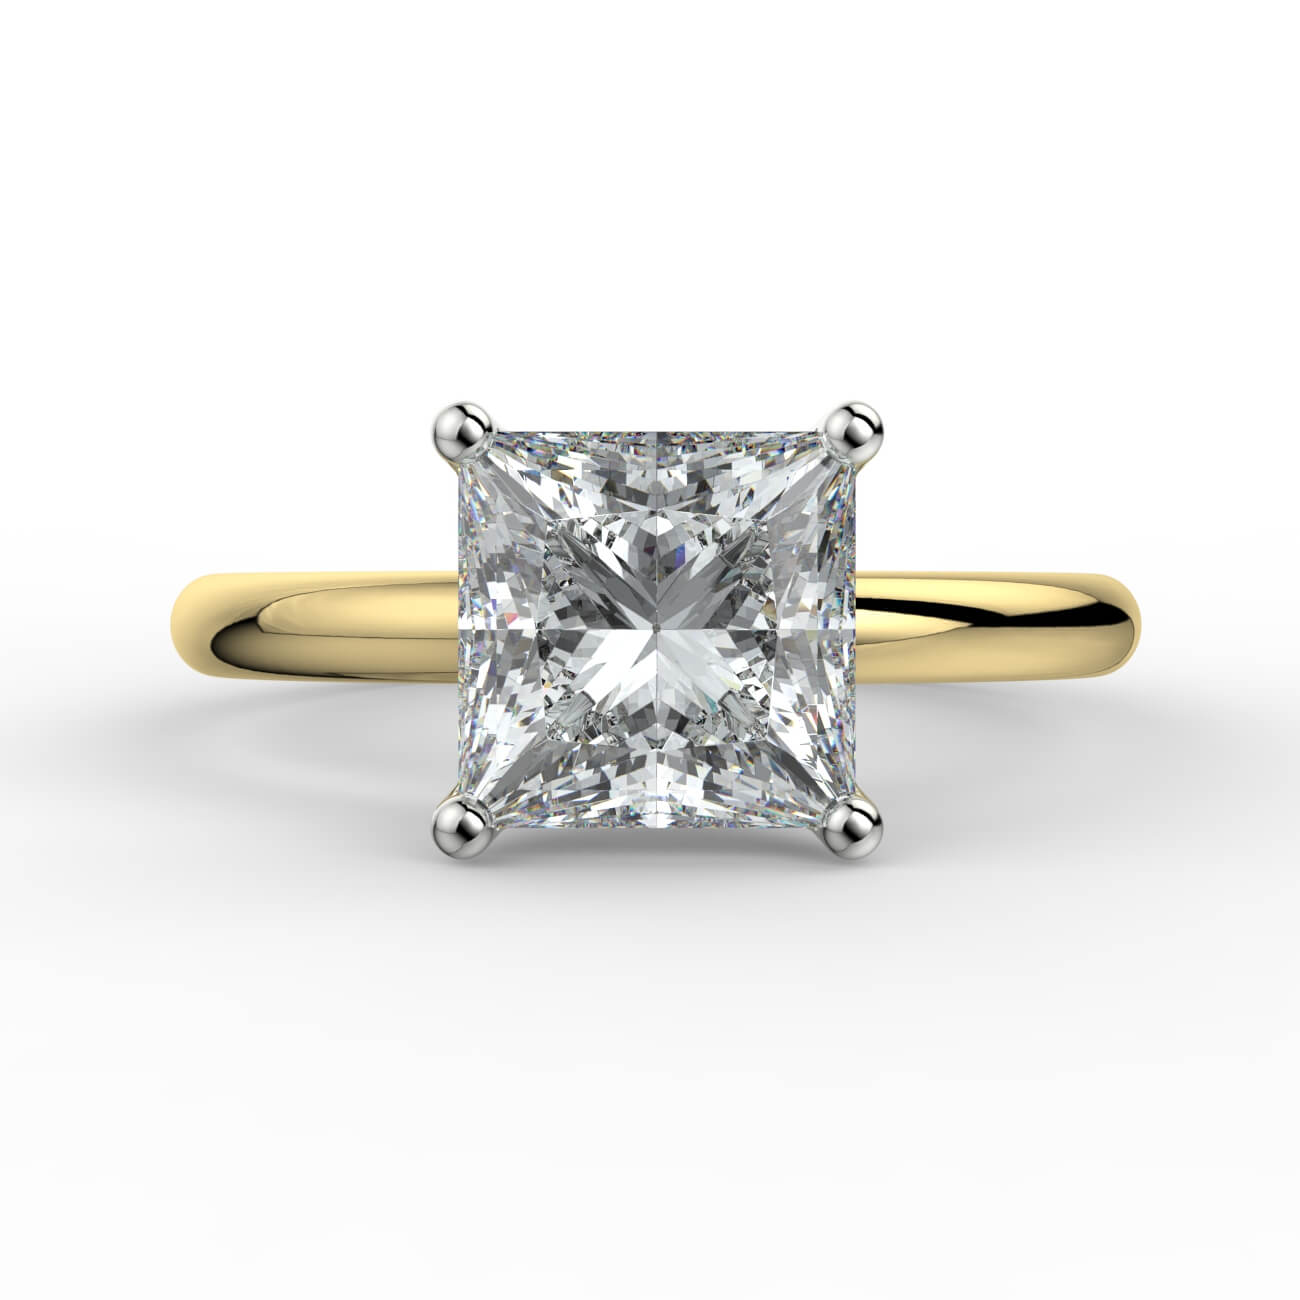 Solitaire princess cut diamond engagement ring in white and yellow gold – Australian Diamond Network